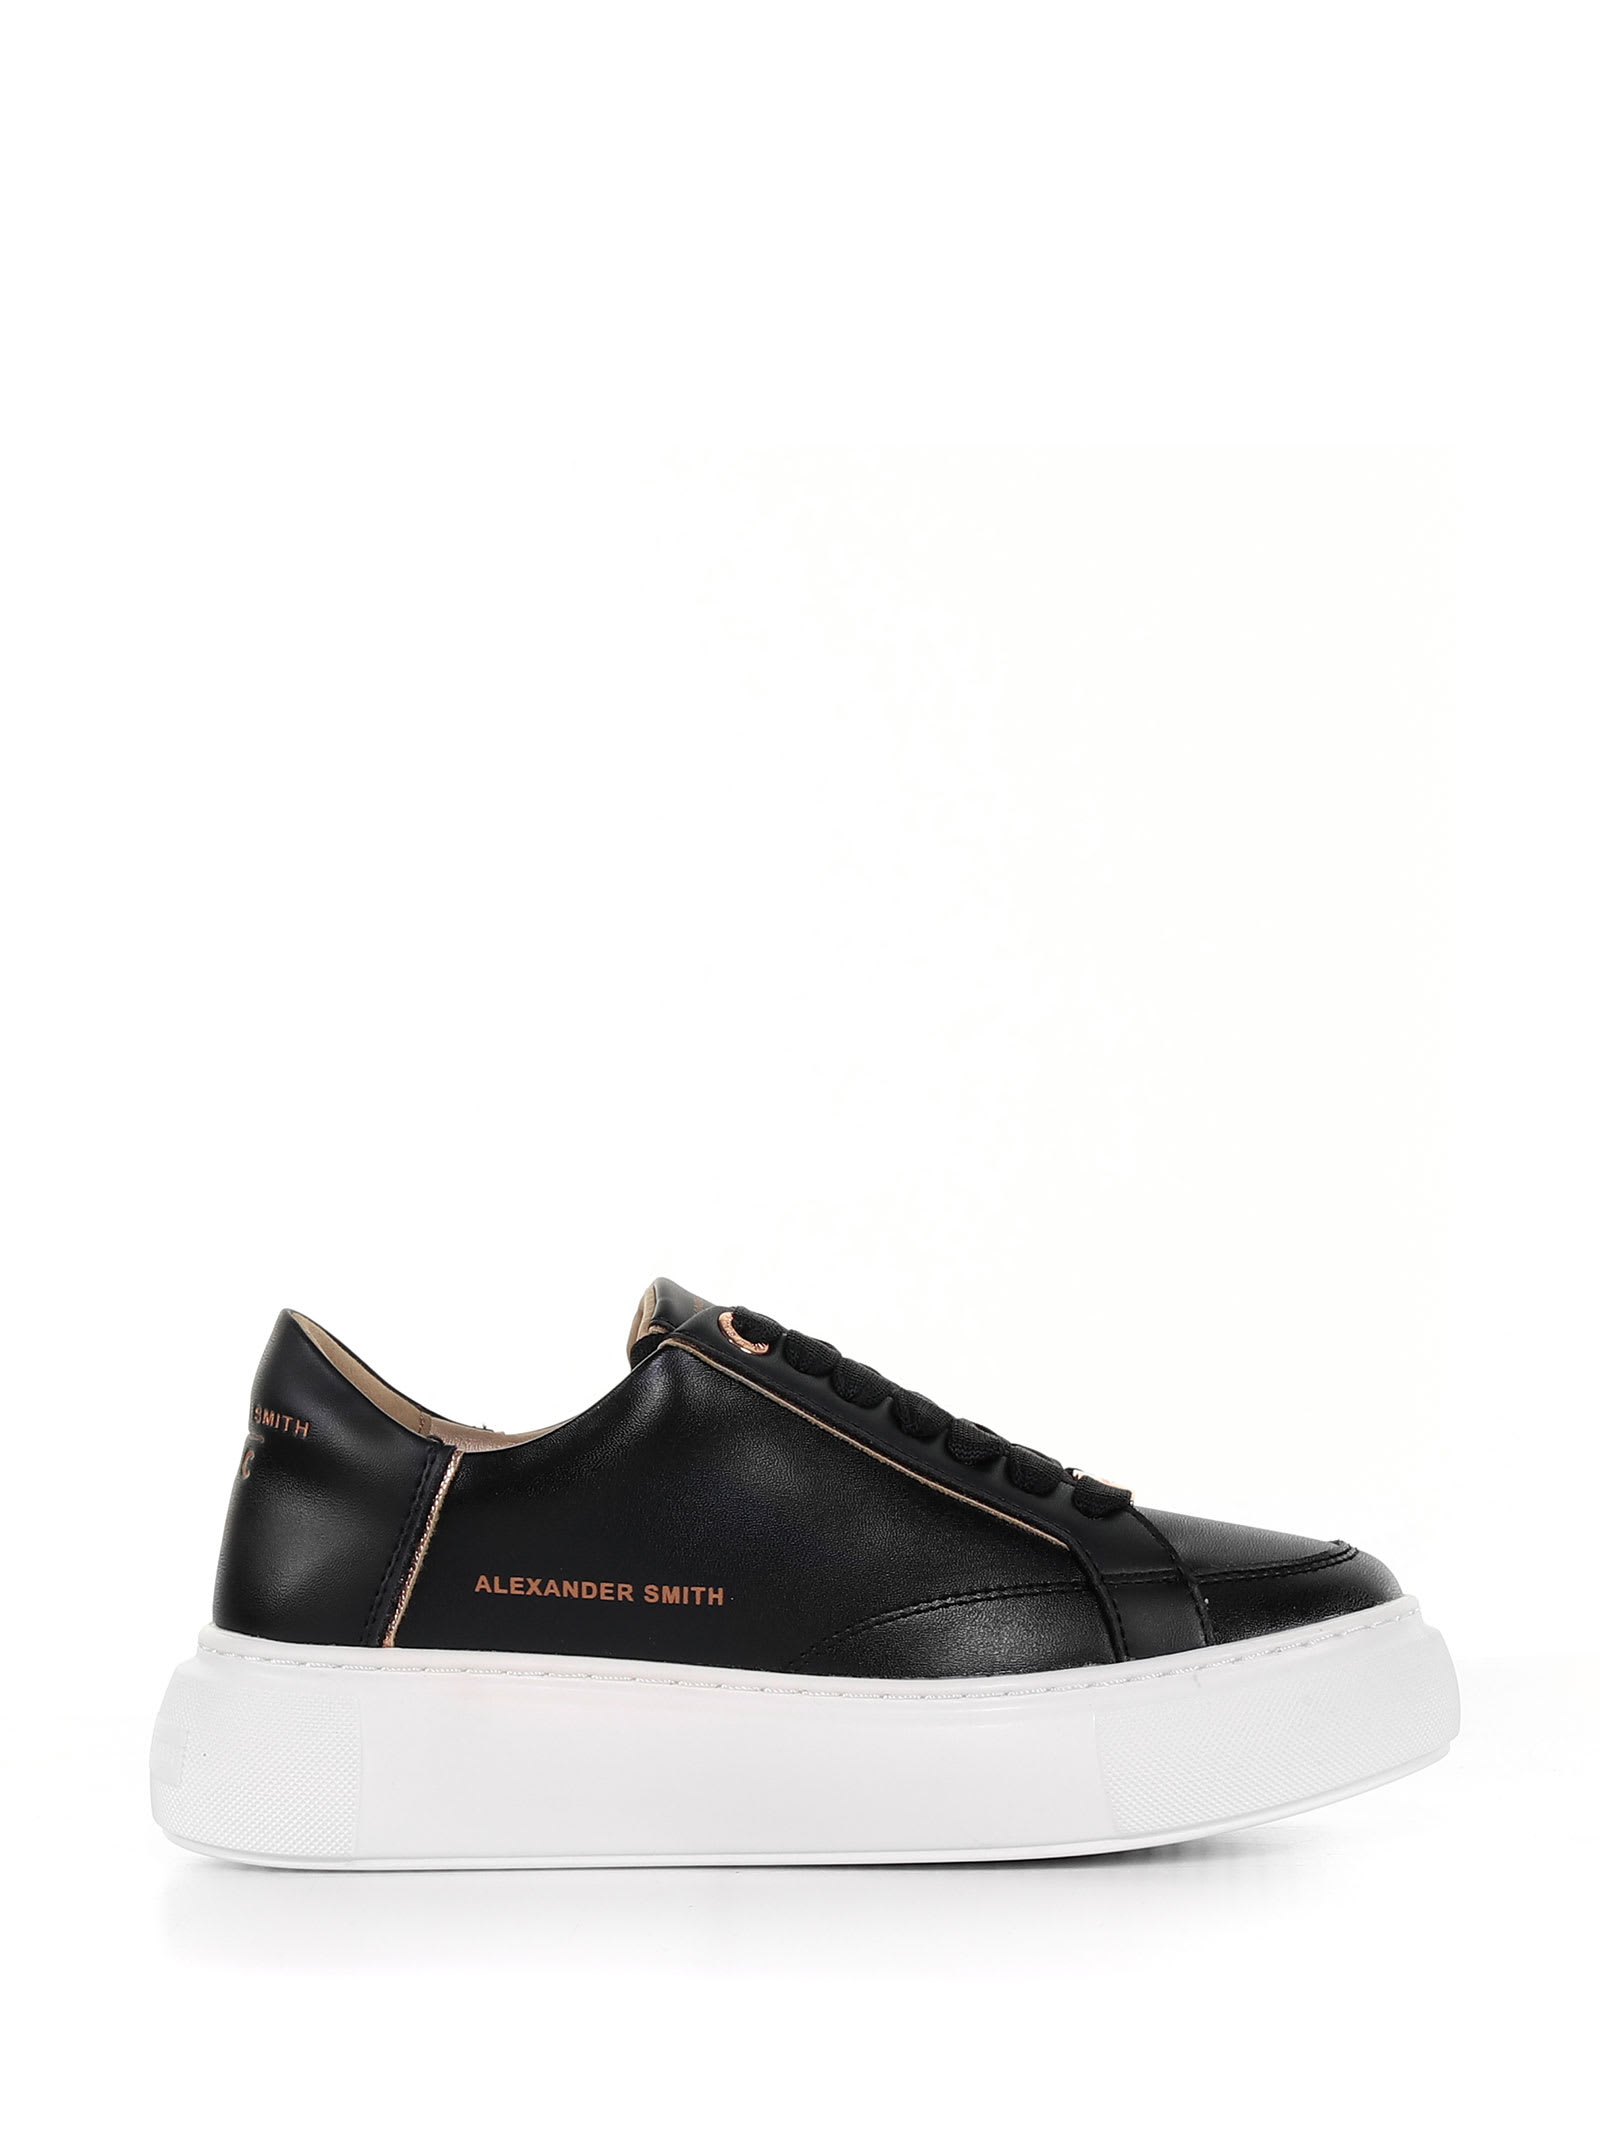 Alexander Smith London Leather Sneakers